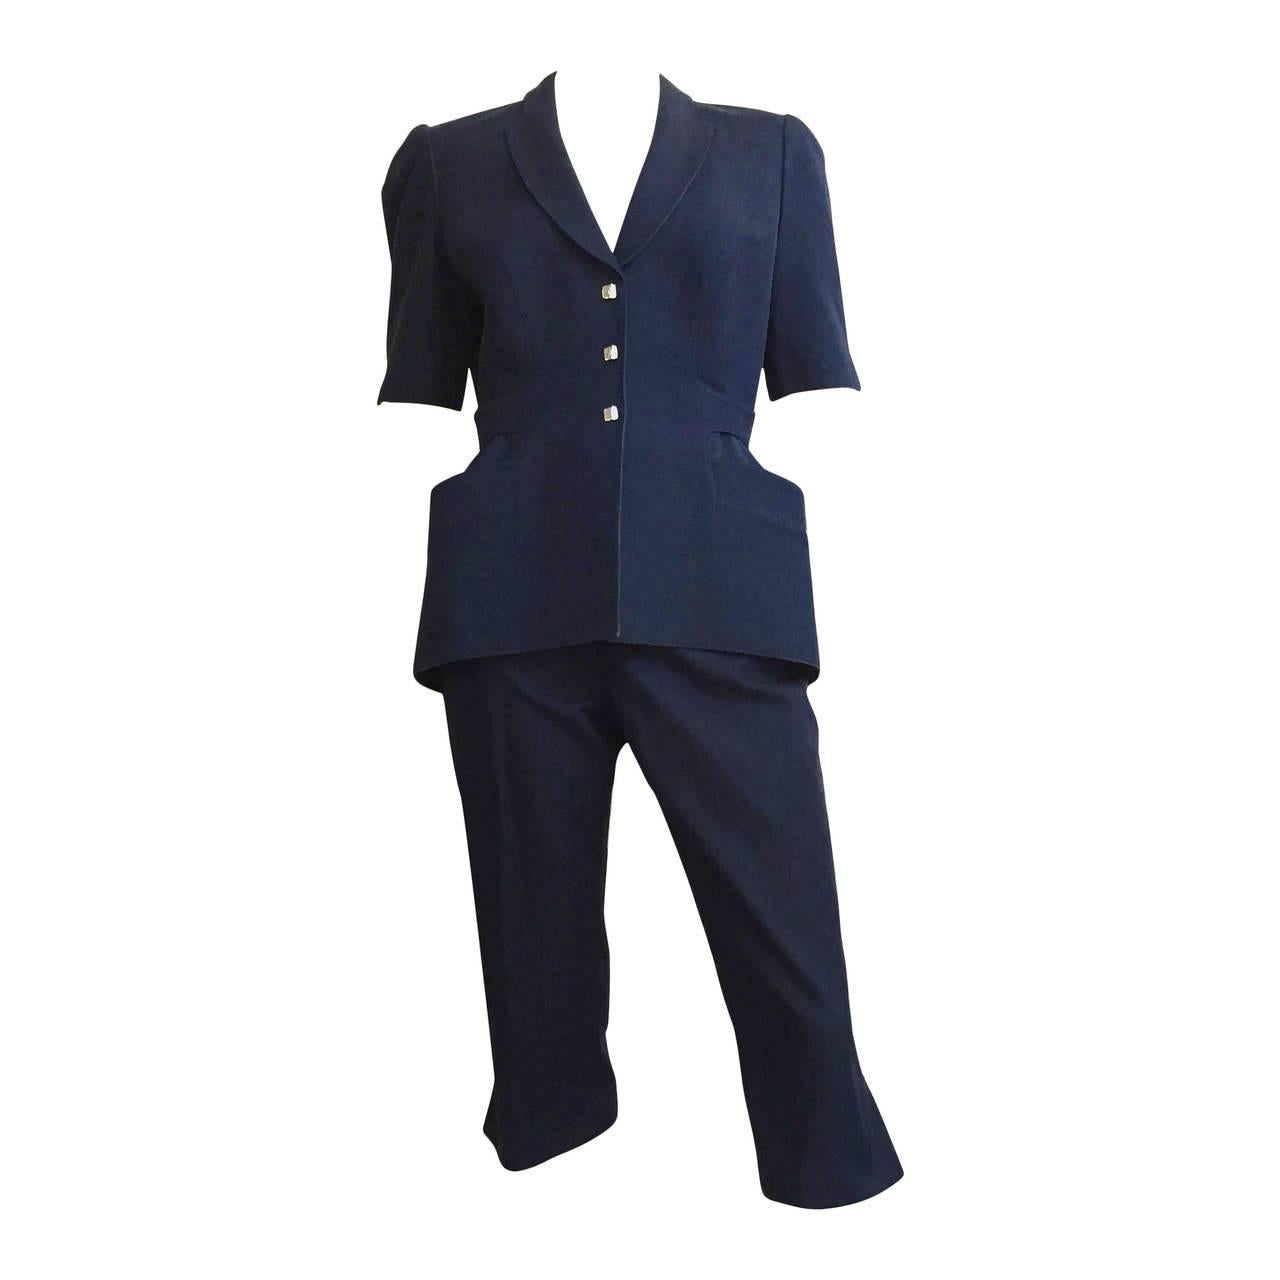 Thierry Mugler Denim Suit Size 8. For Sale